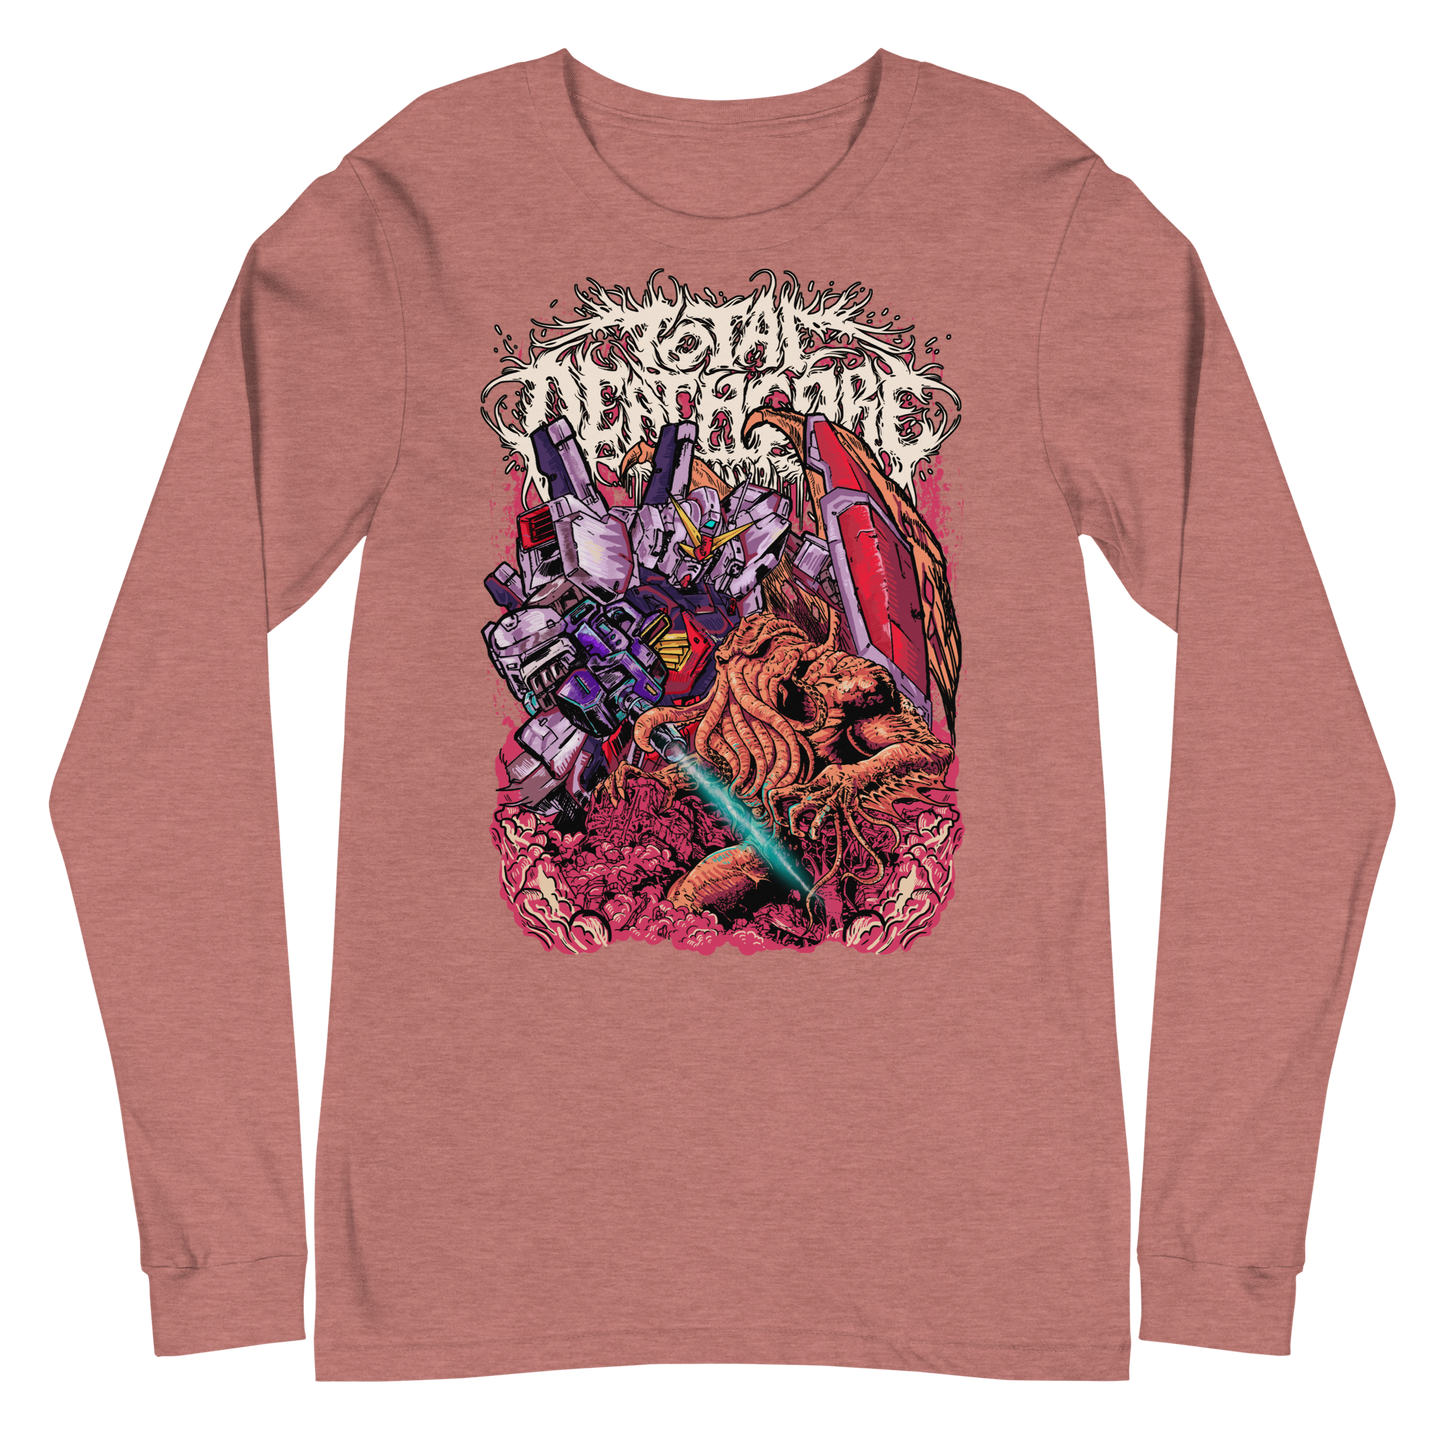 Total Deathcore "Final Fight" - Unisex Long Sleeve Tee